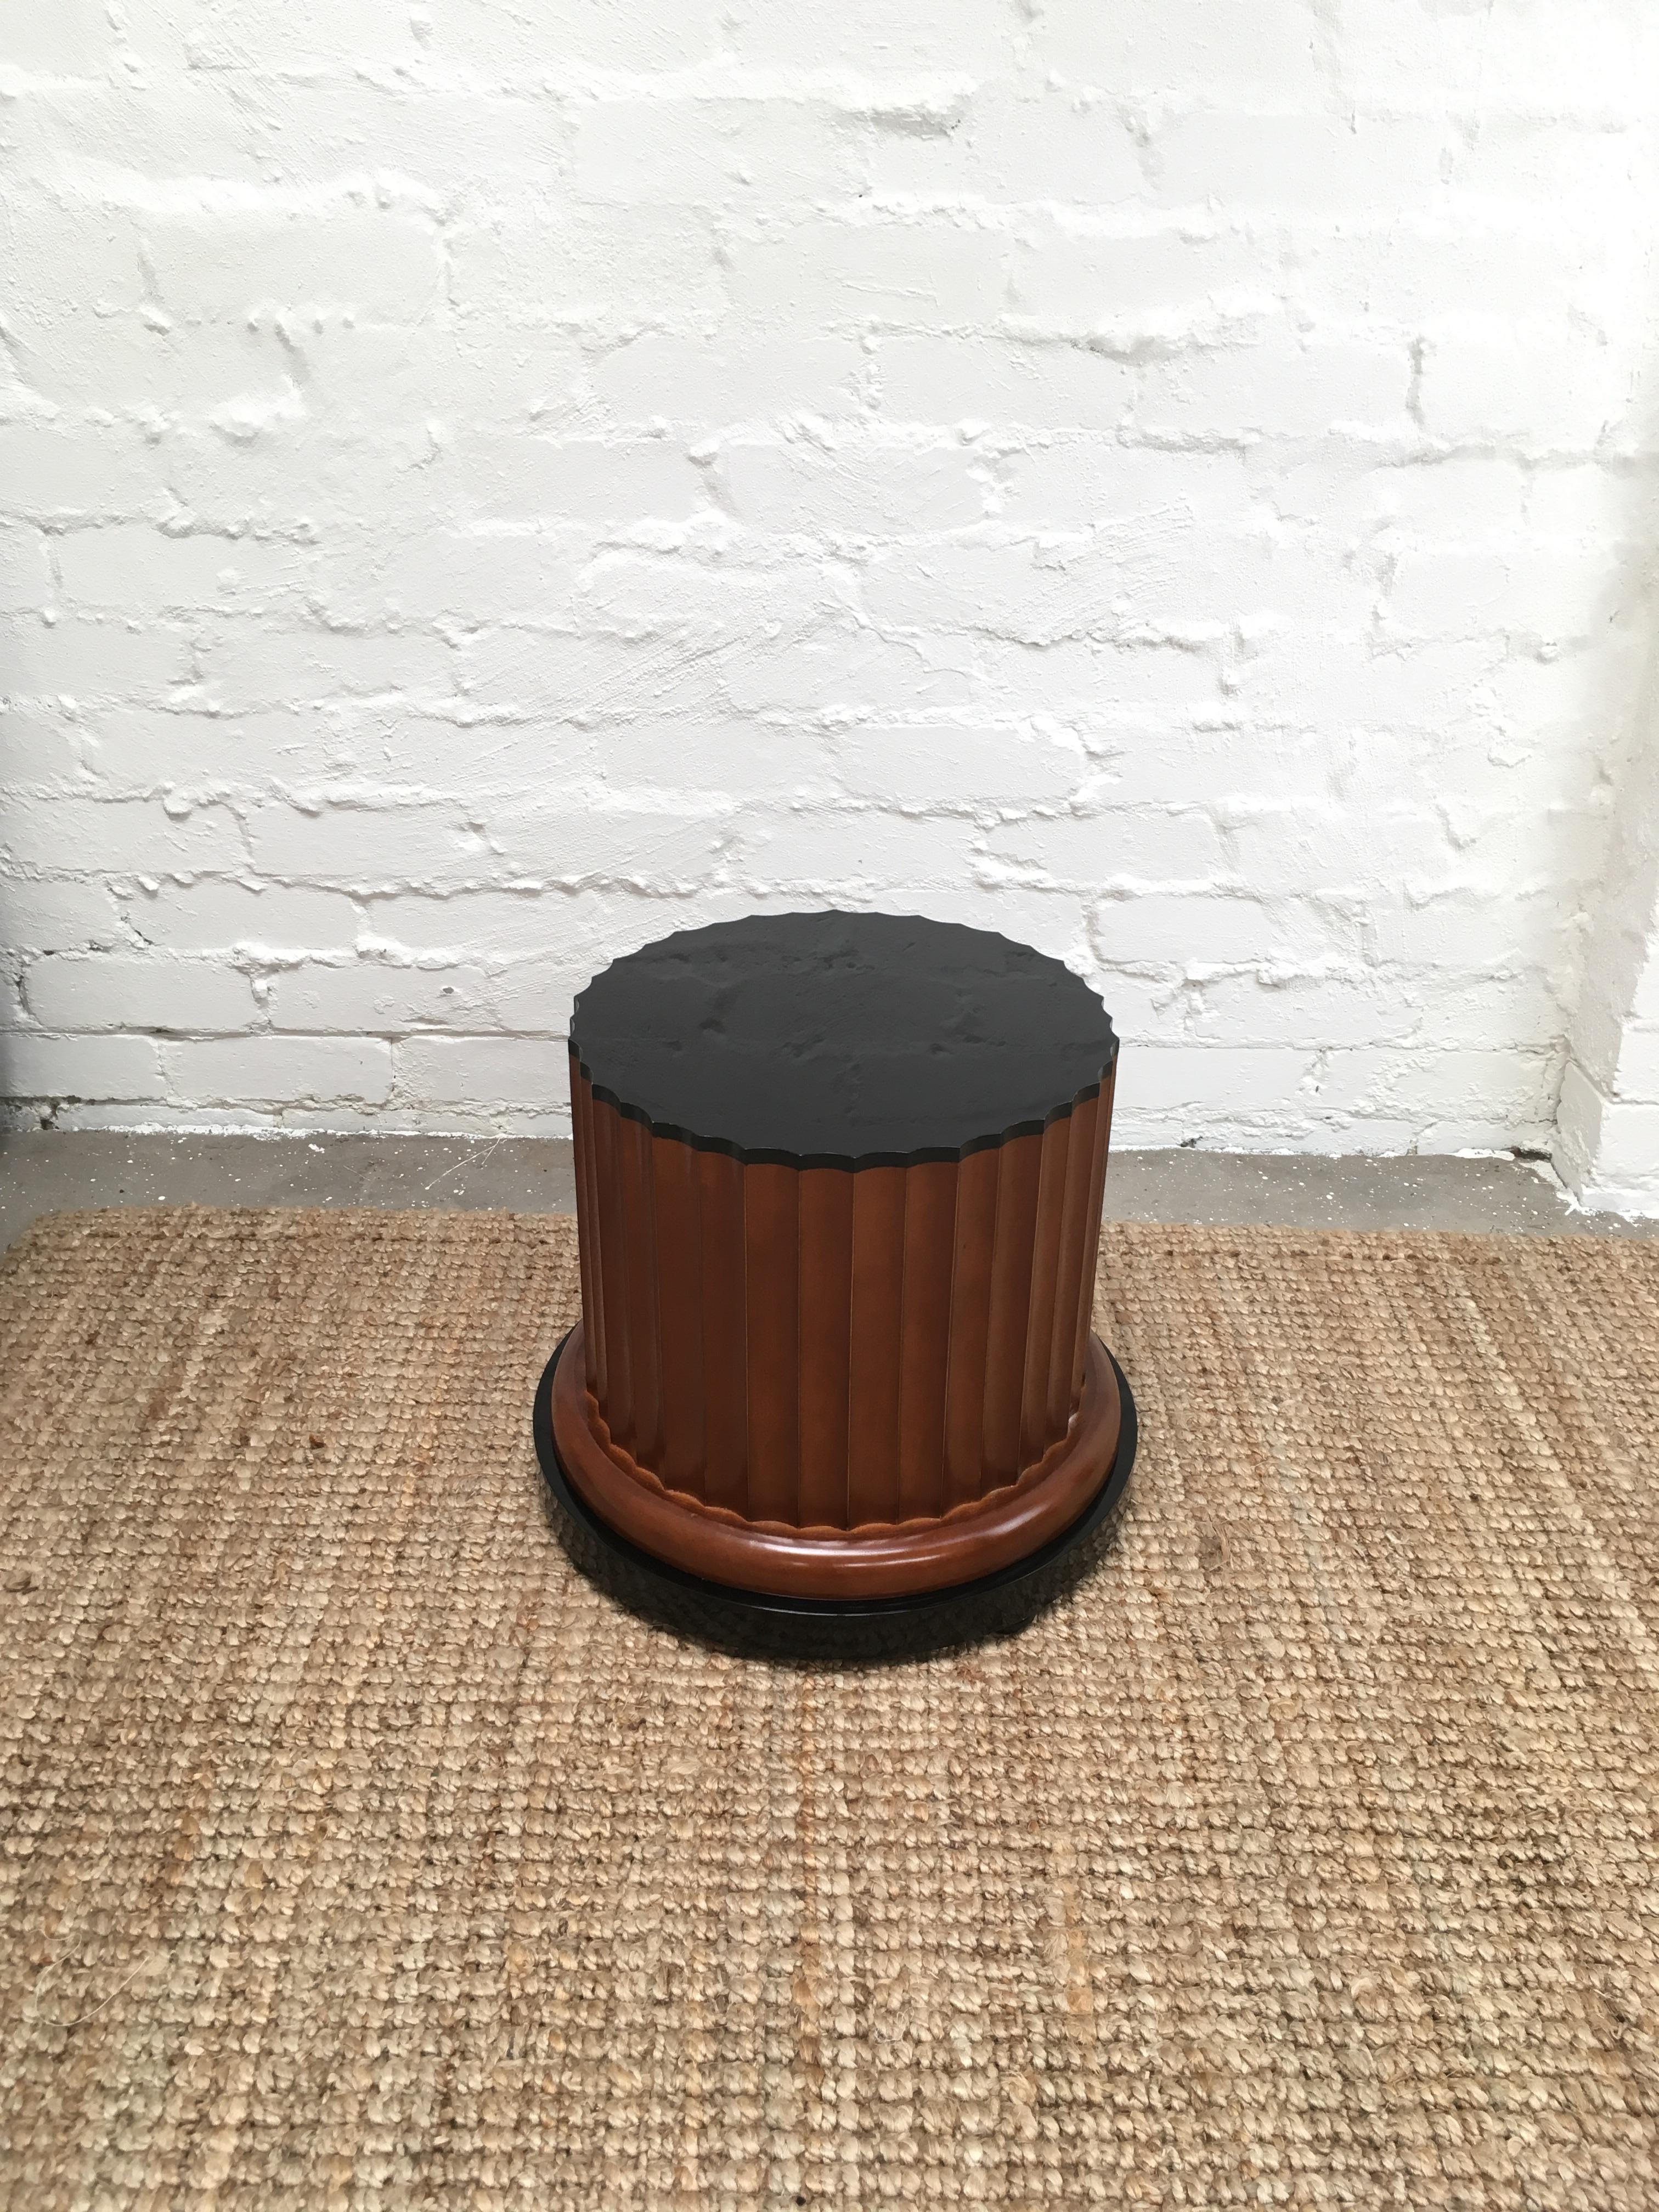 Late 20th Century Italian Fluted Wood Pillar Column Pedestal Side Table or Stand